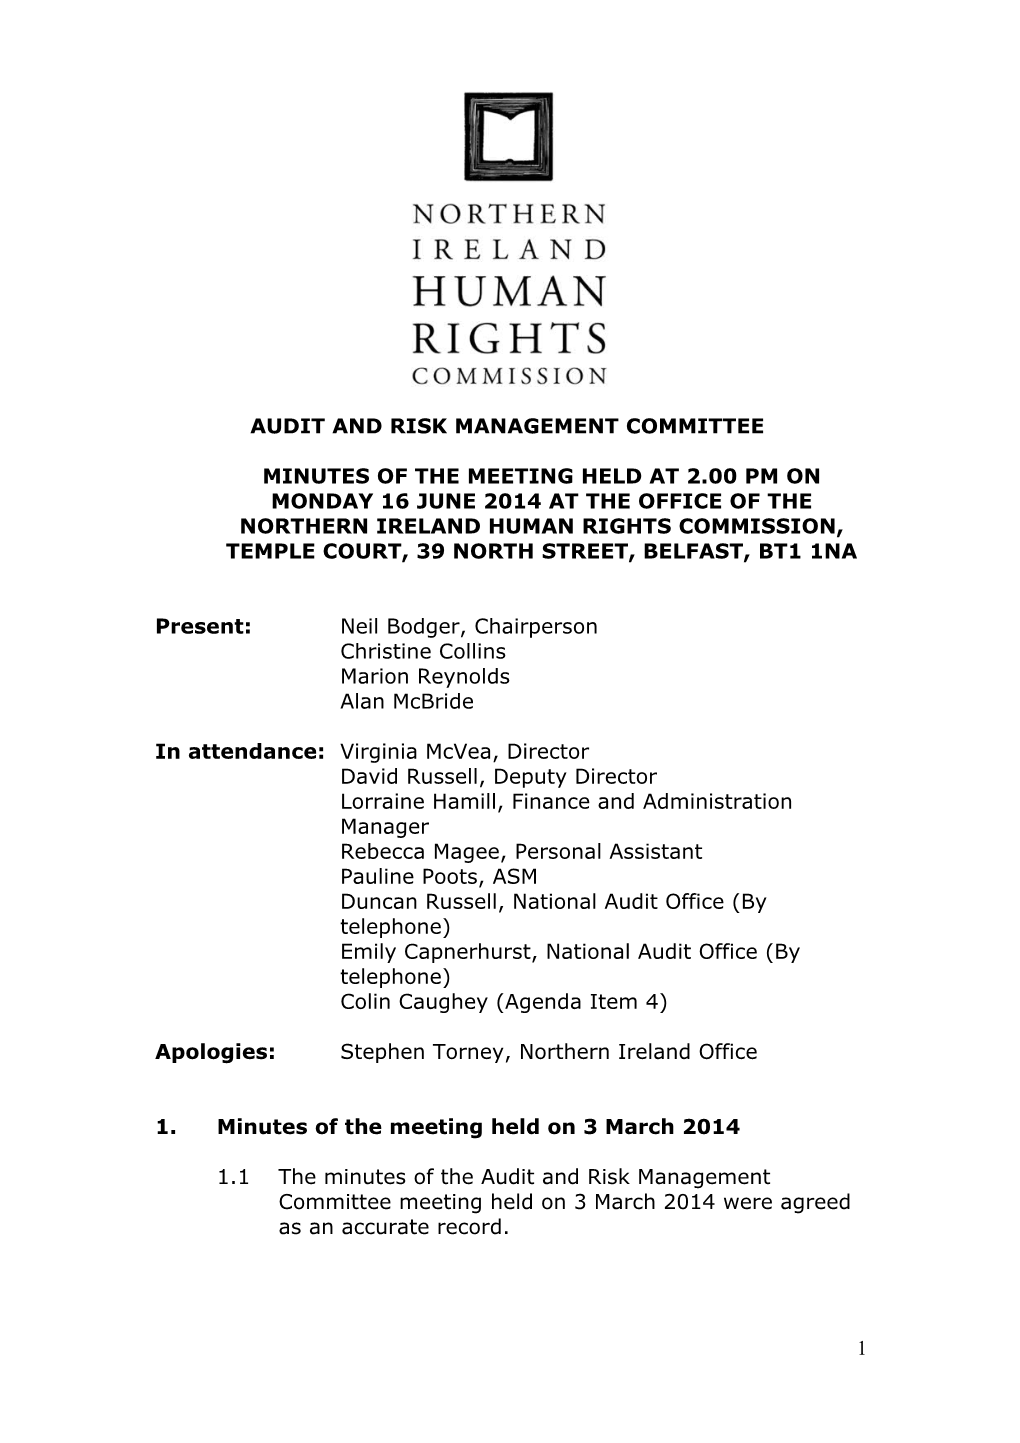 Audit and Risk Management Committee